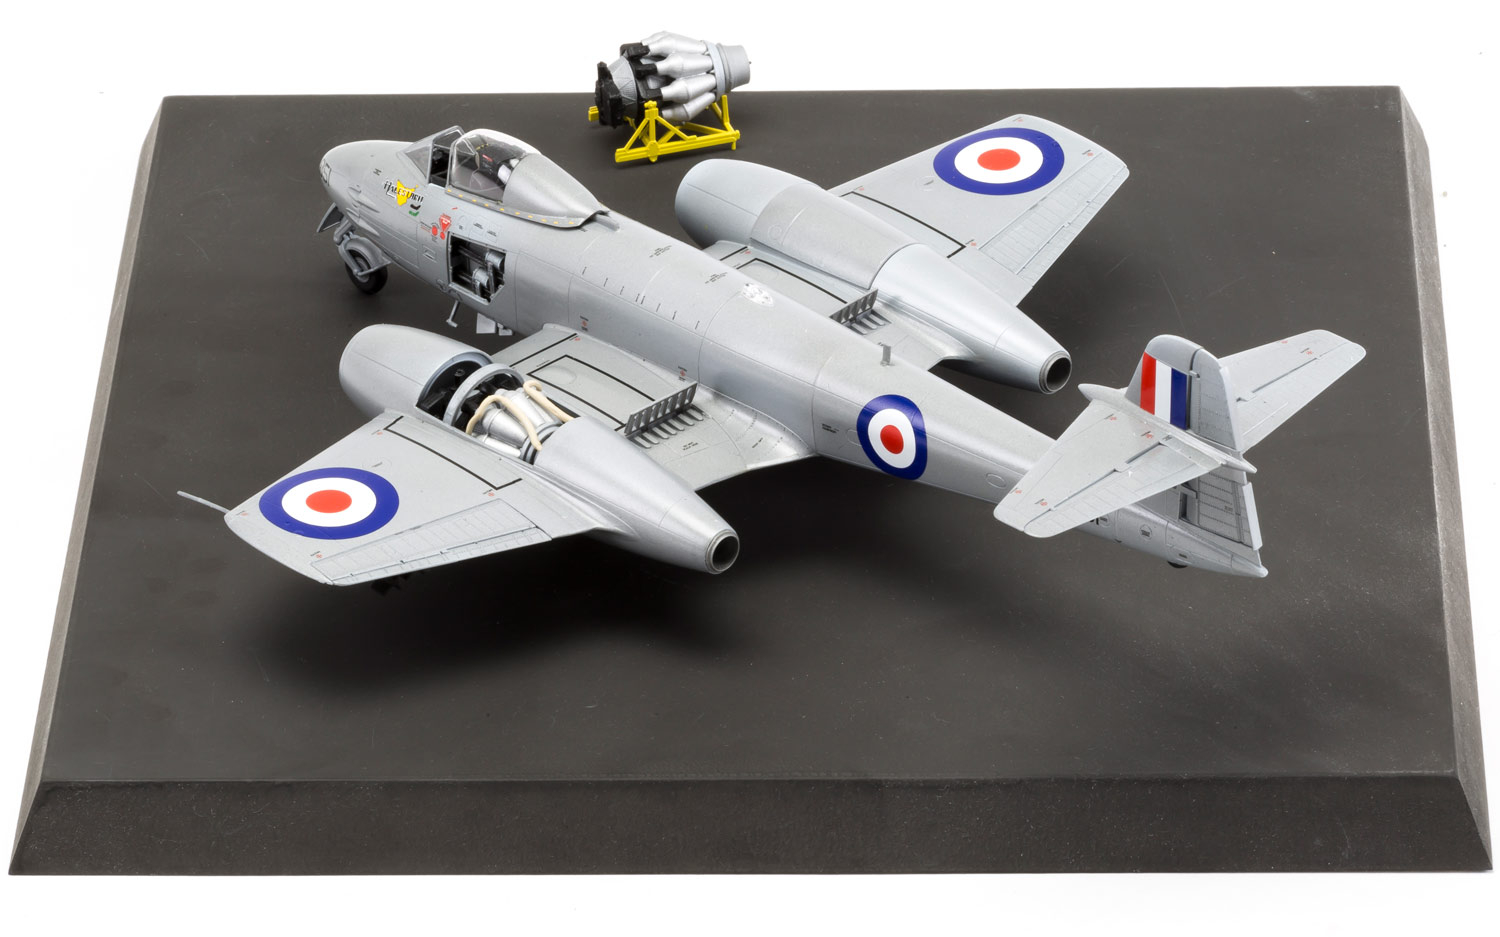 1//48 Gloster Meteor F.8 Interior Detail for Airfix #09182 kit